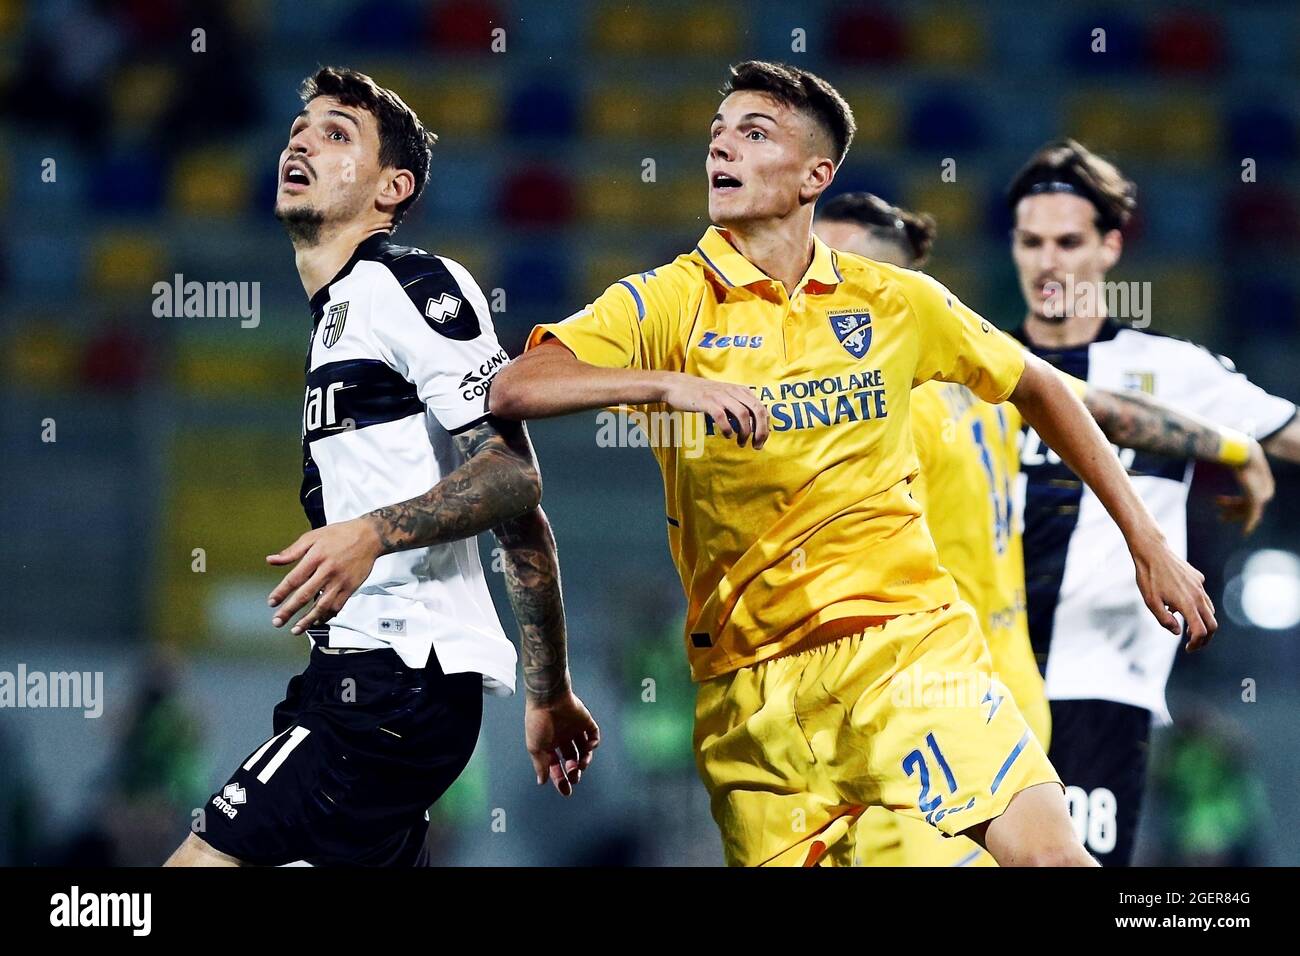 Frosinone, Italy. 20th Aug, 2021. Stanko Juric of Parma (L) fights for the  ball with Daniel Boloca of Frosinone (R) during the Italian championship  Serie B BKT football match between Frosinone Calcio